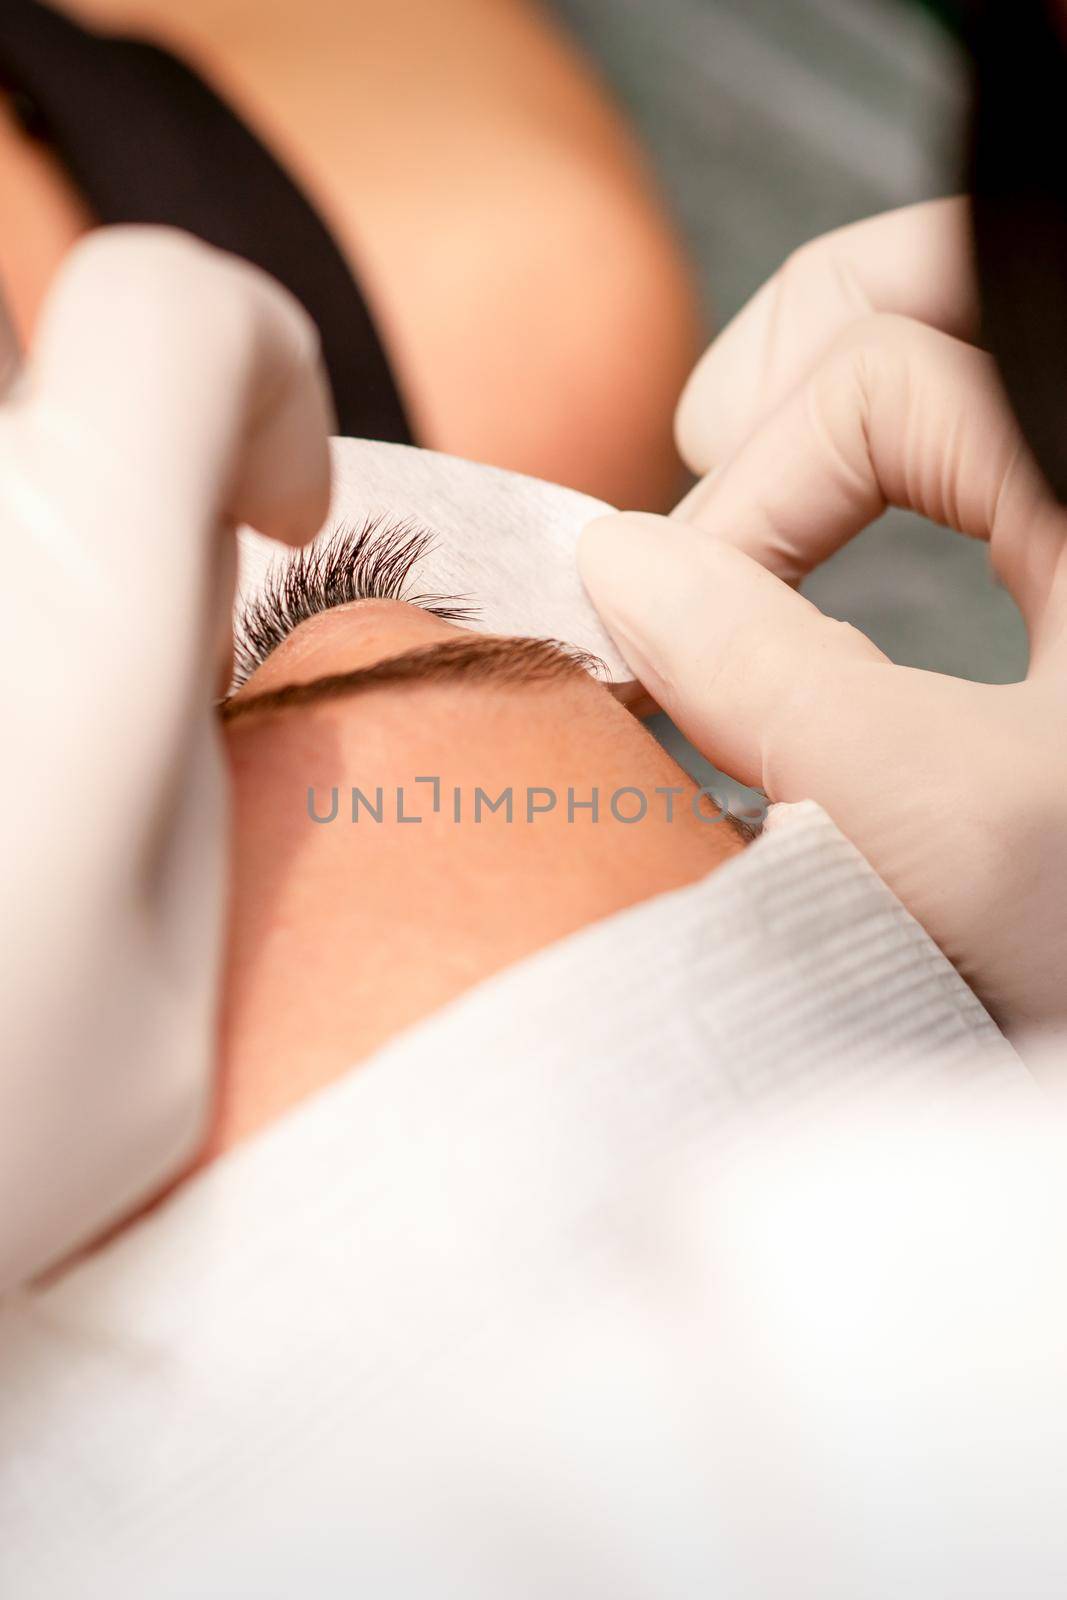 The hands of the cosmetologist are gluing white tape under the eye of the young caucasian woman during the eyelash extension procedure, closeup